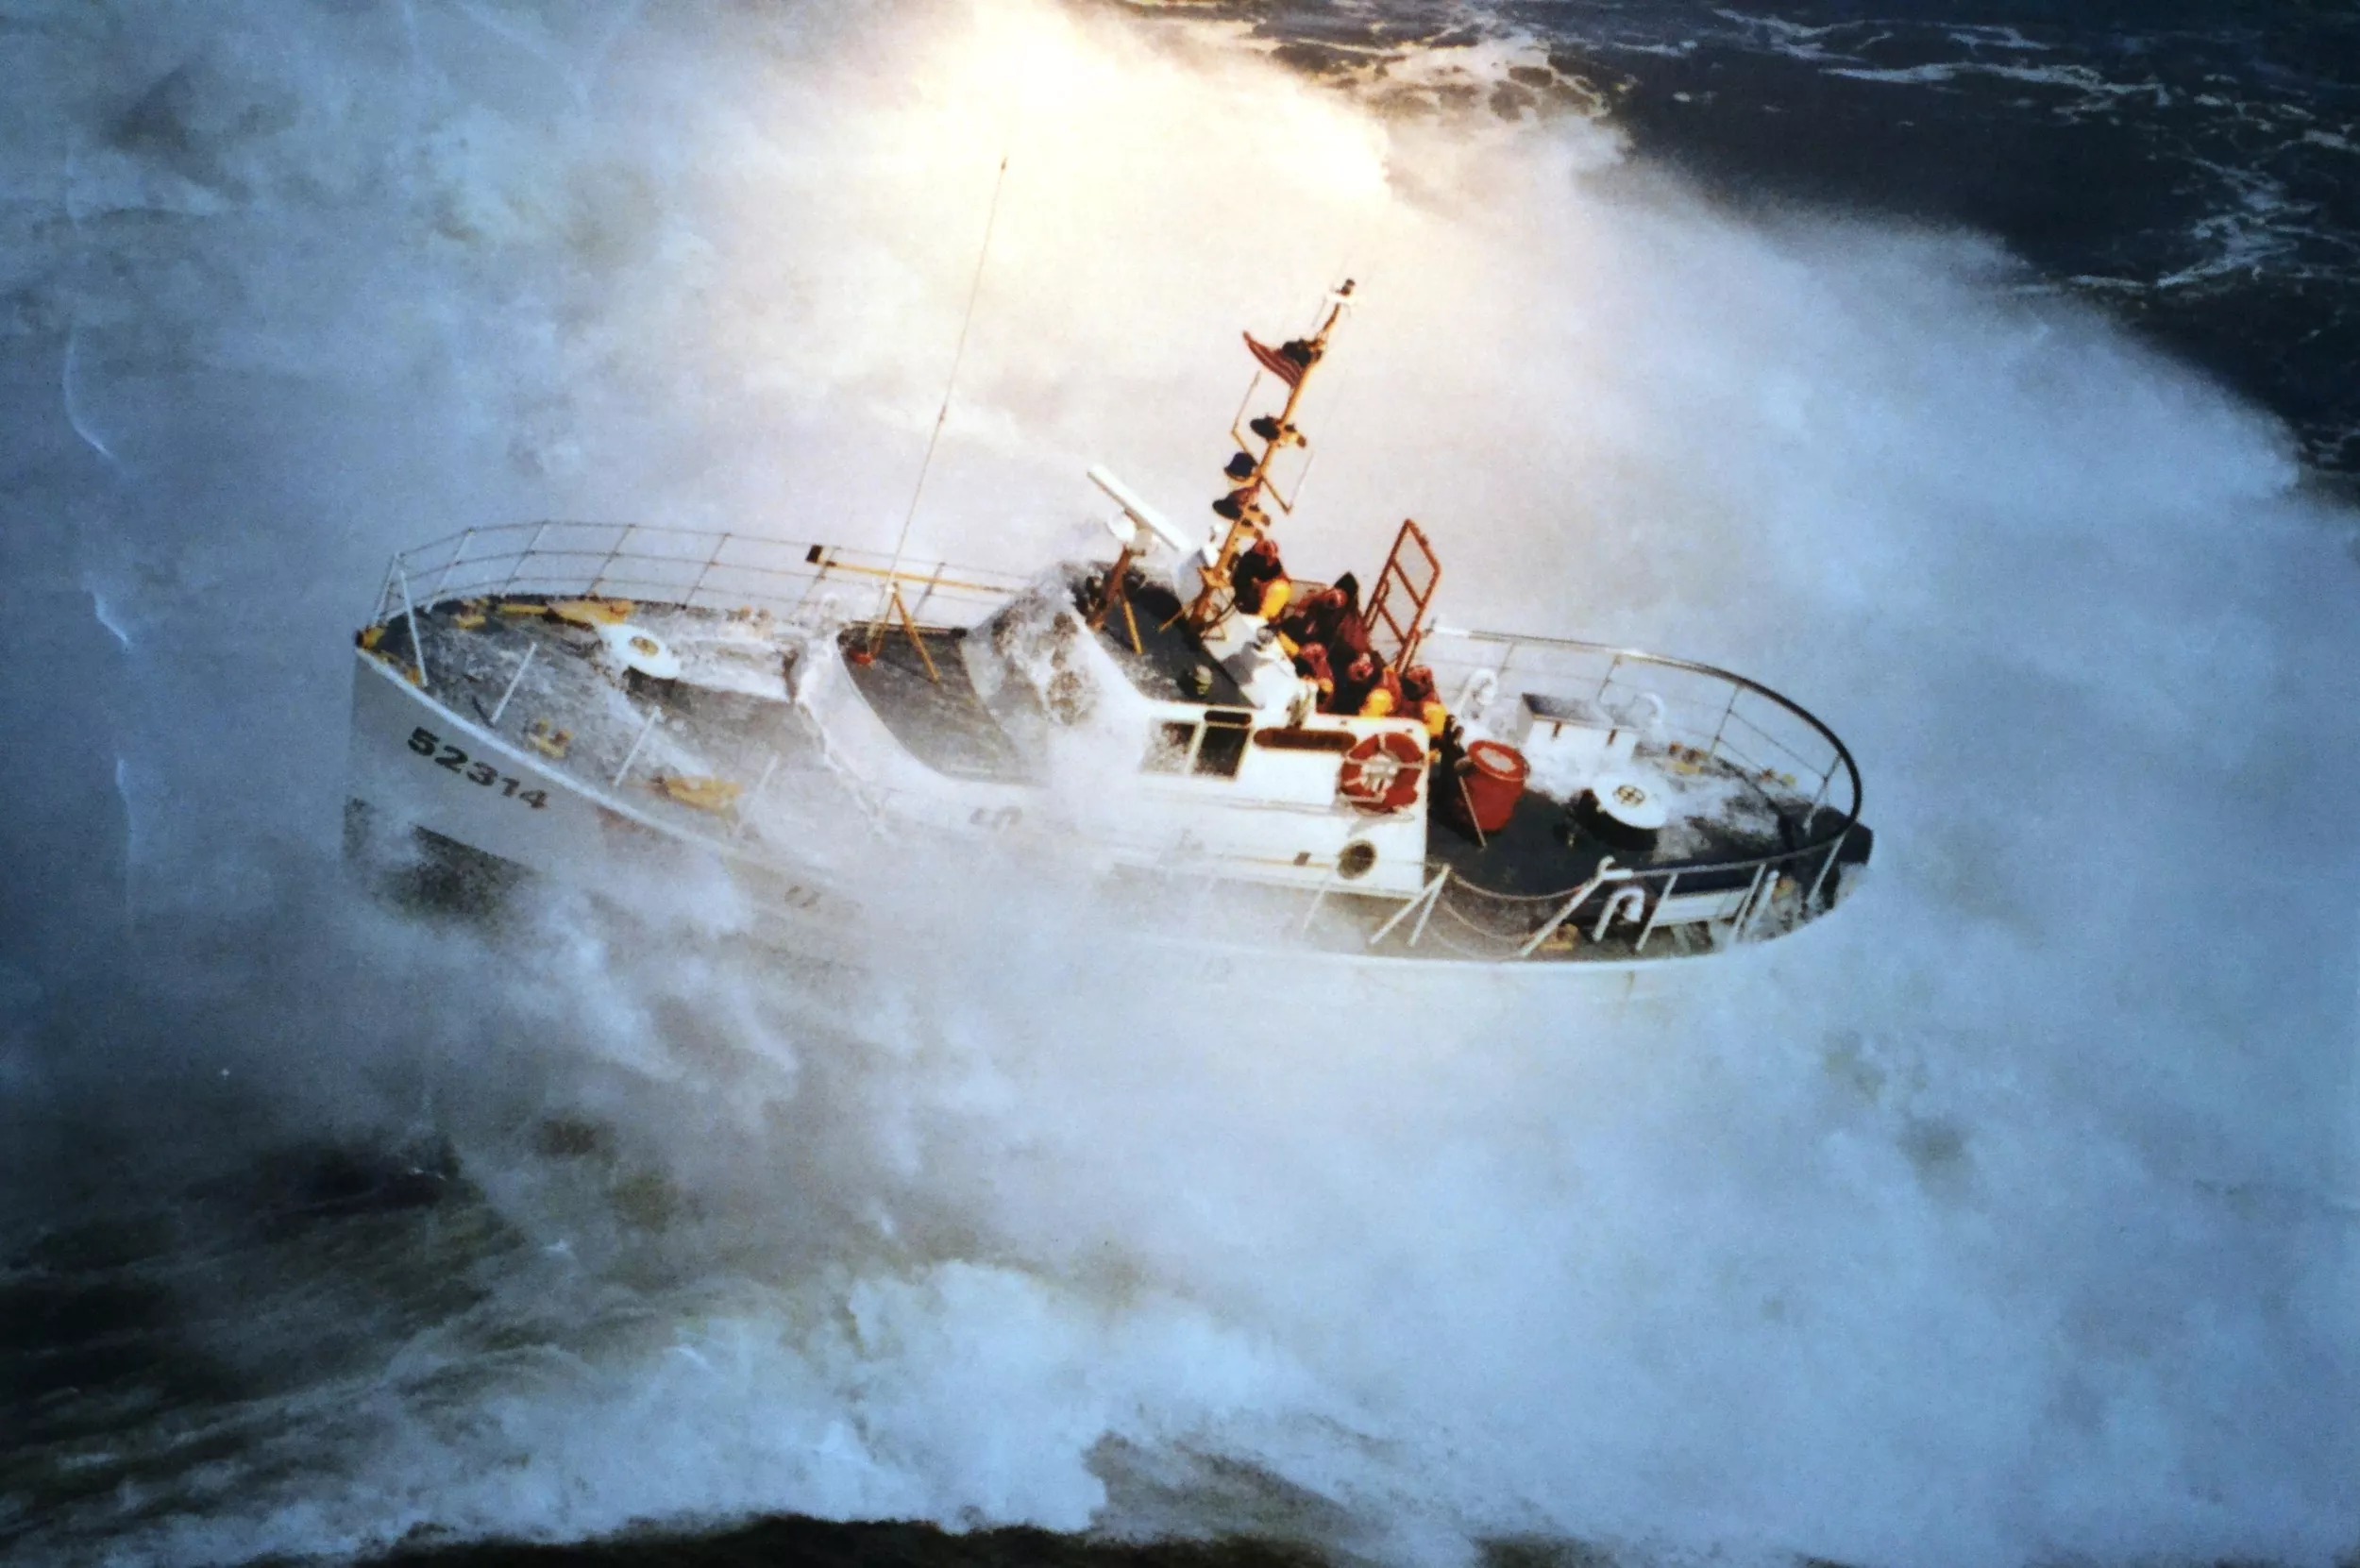 The 52-foot steel-hulled motor lifeboat Triumph II in heavy seas. (The Spokesman-Review newspaper)